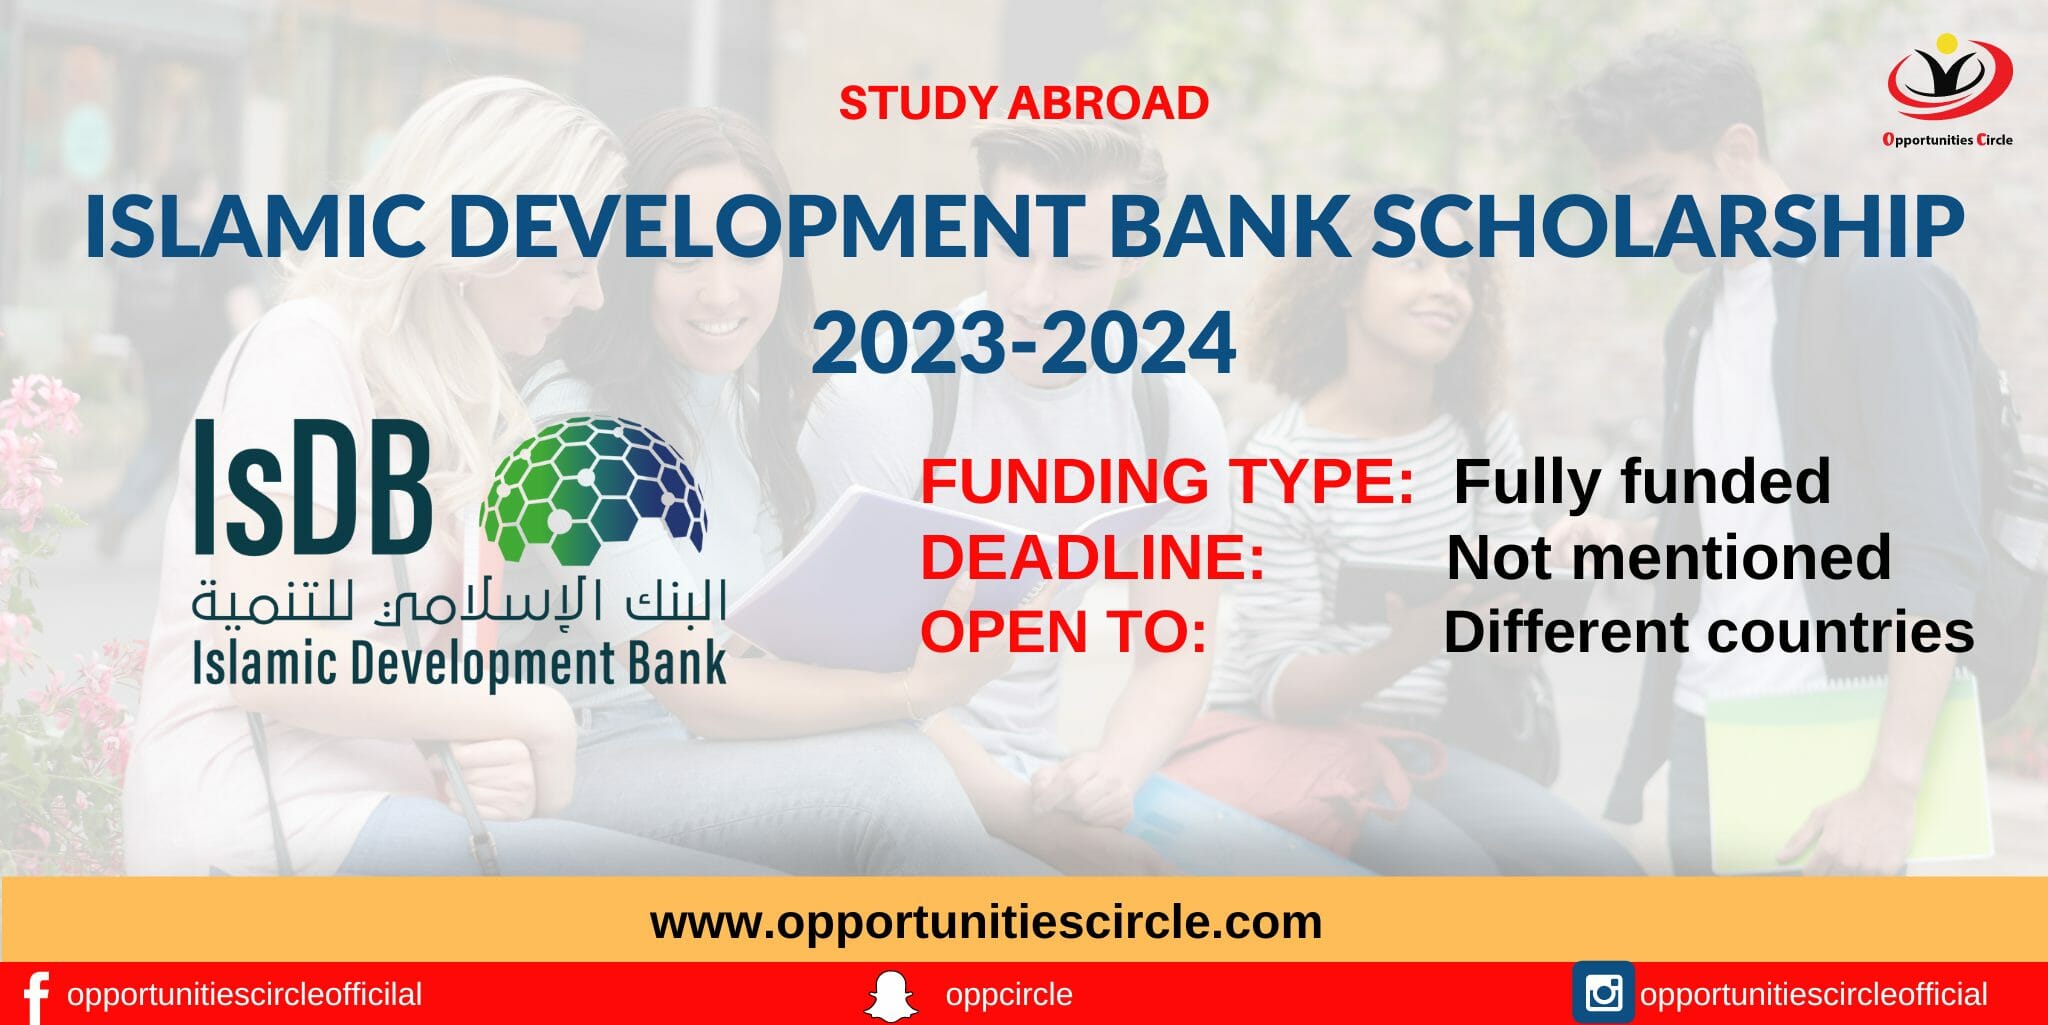 Islamic Development Bank Scholarship 20232024 Fully Funded Opportunities Circle